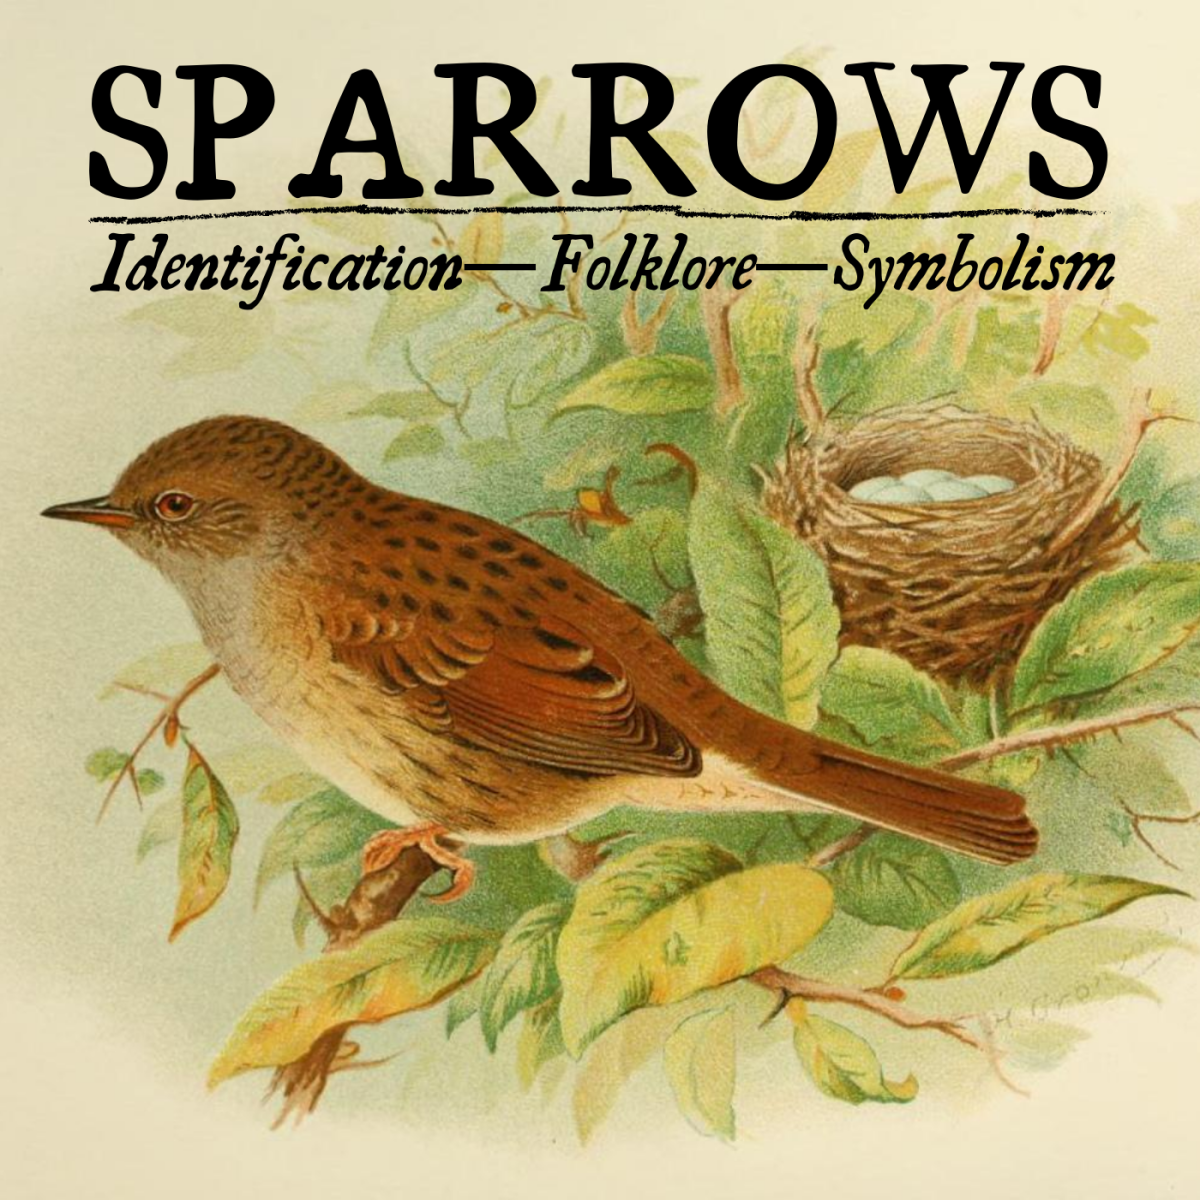 Sparrows are a symbol of what?